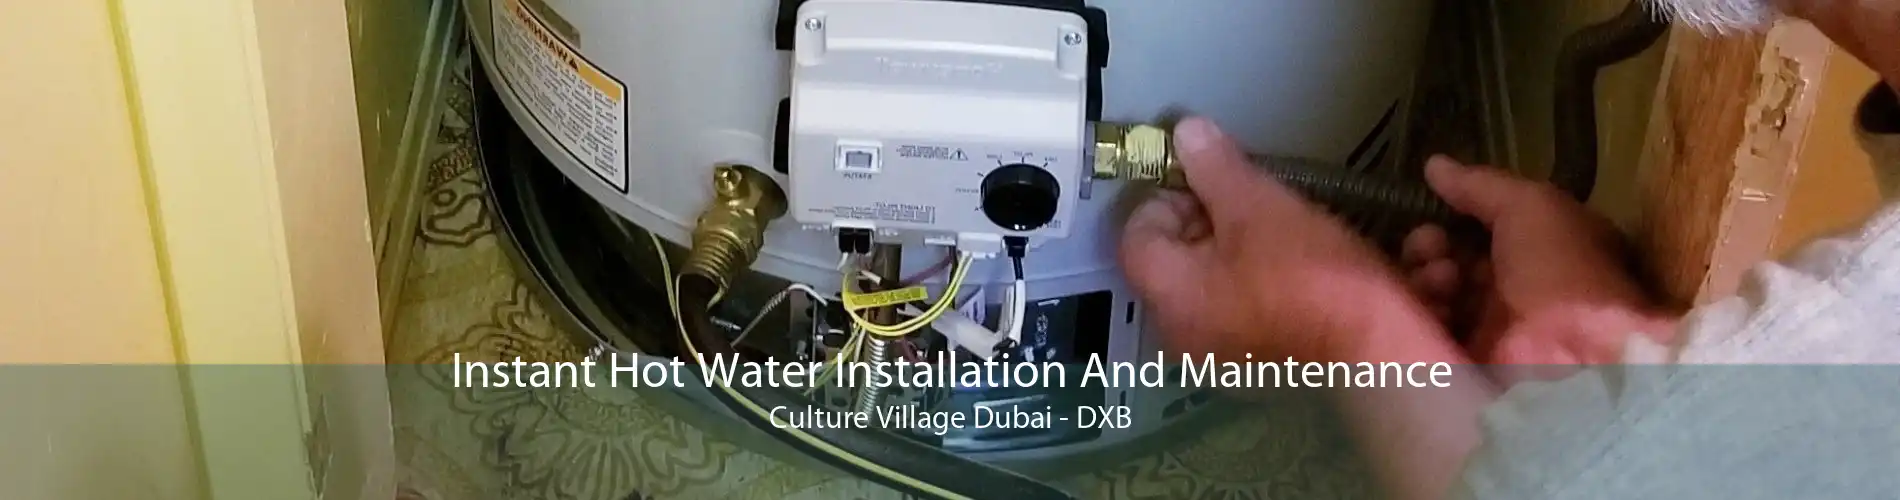 Instant Hot Water Installation And Maintenance Culture Village Dubai - DXB